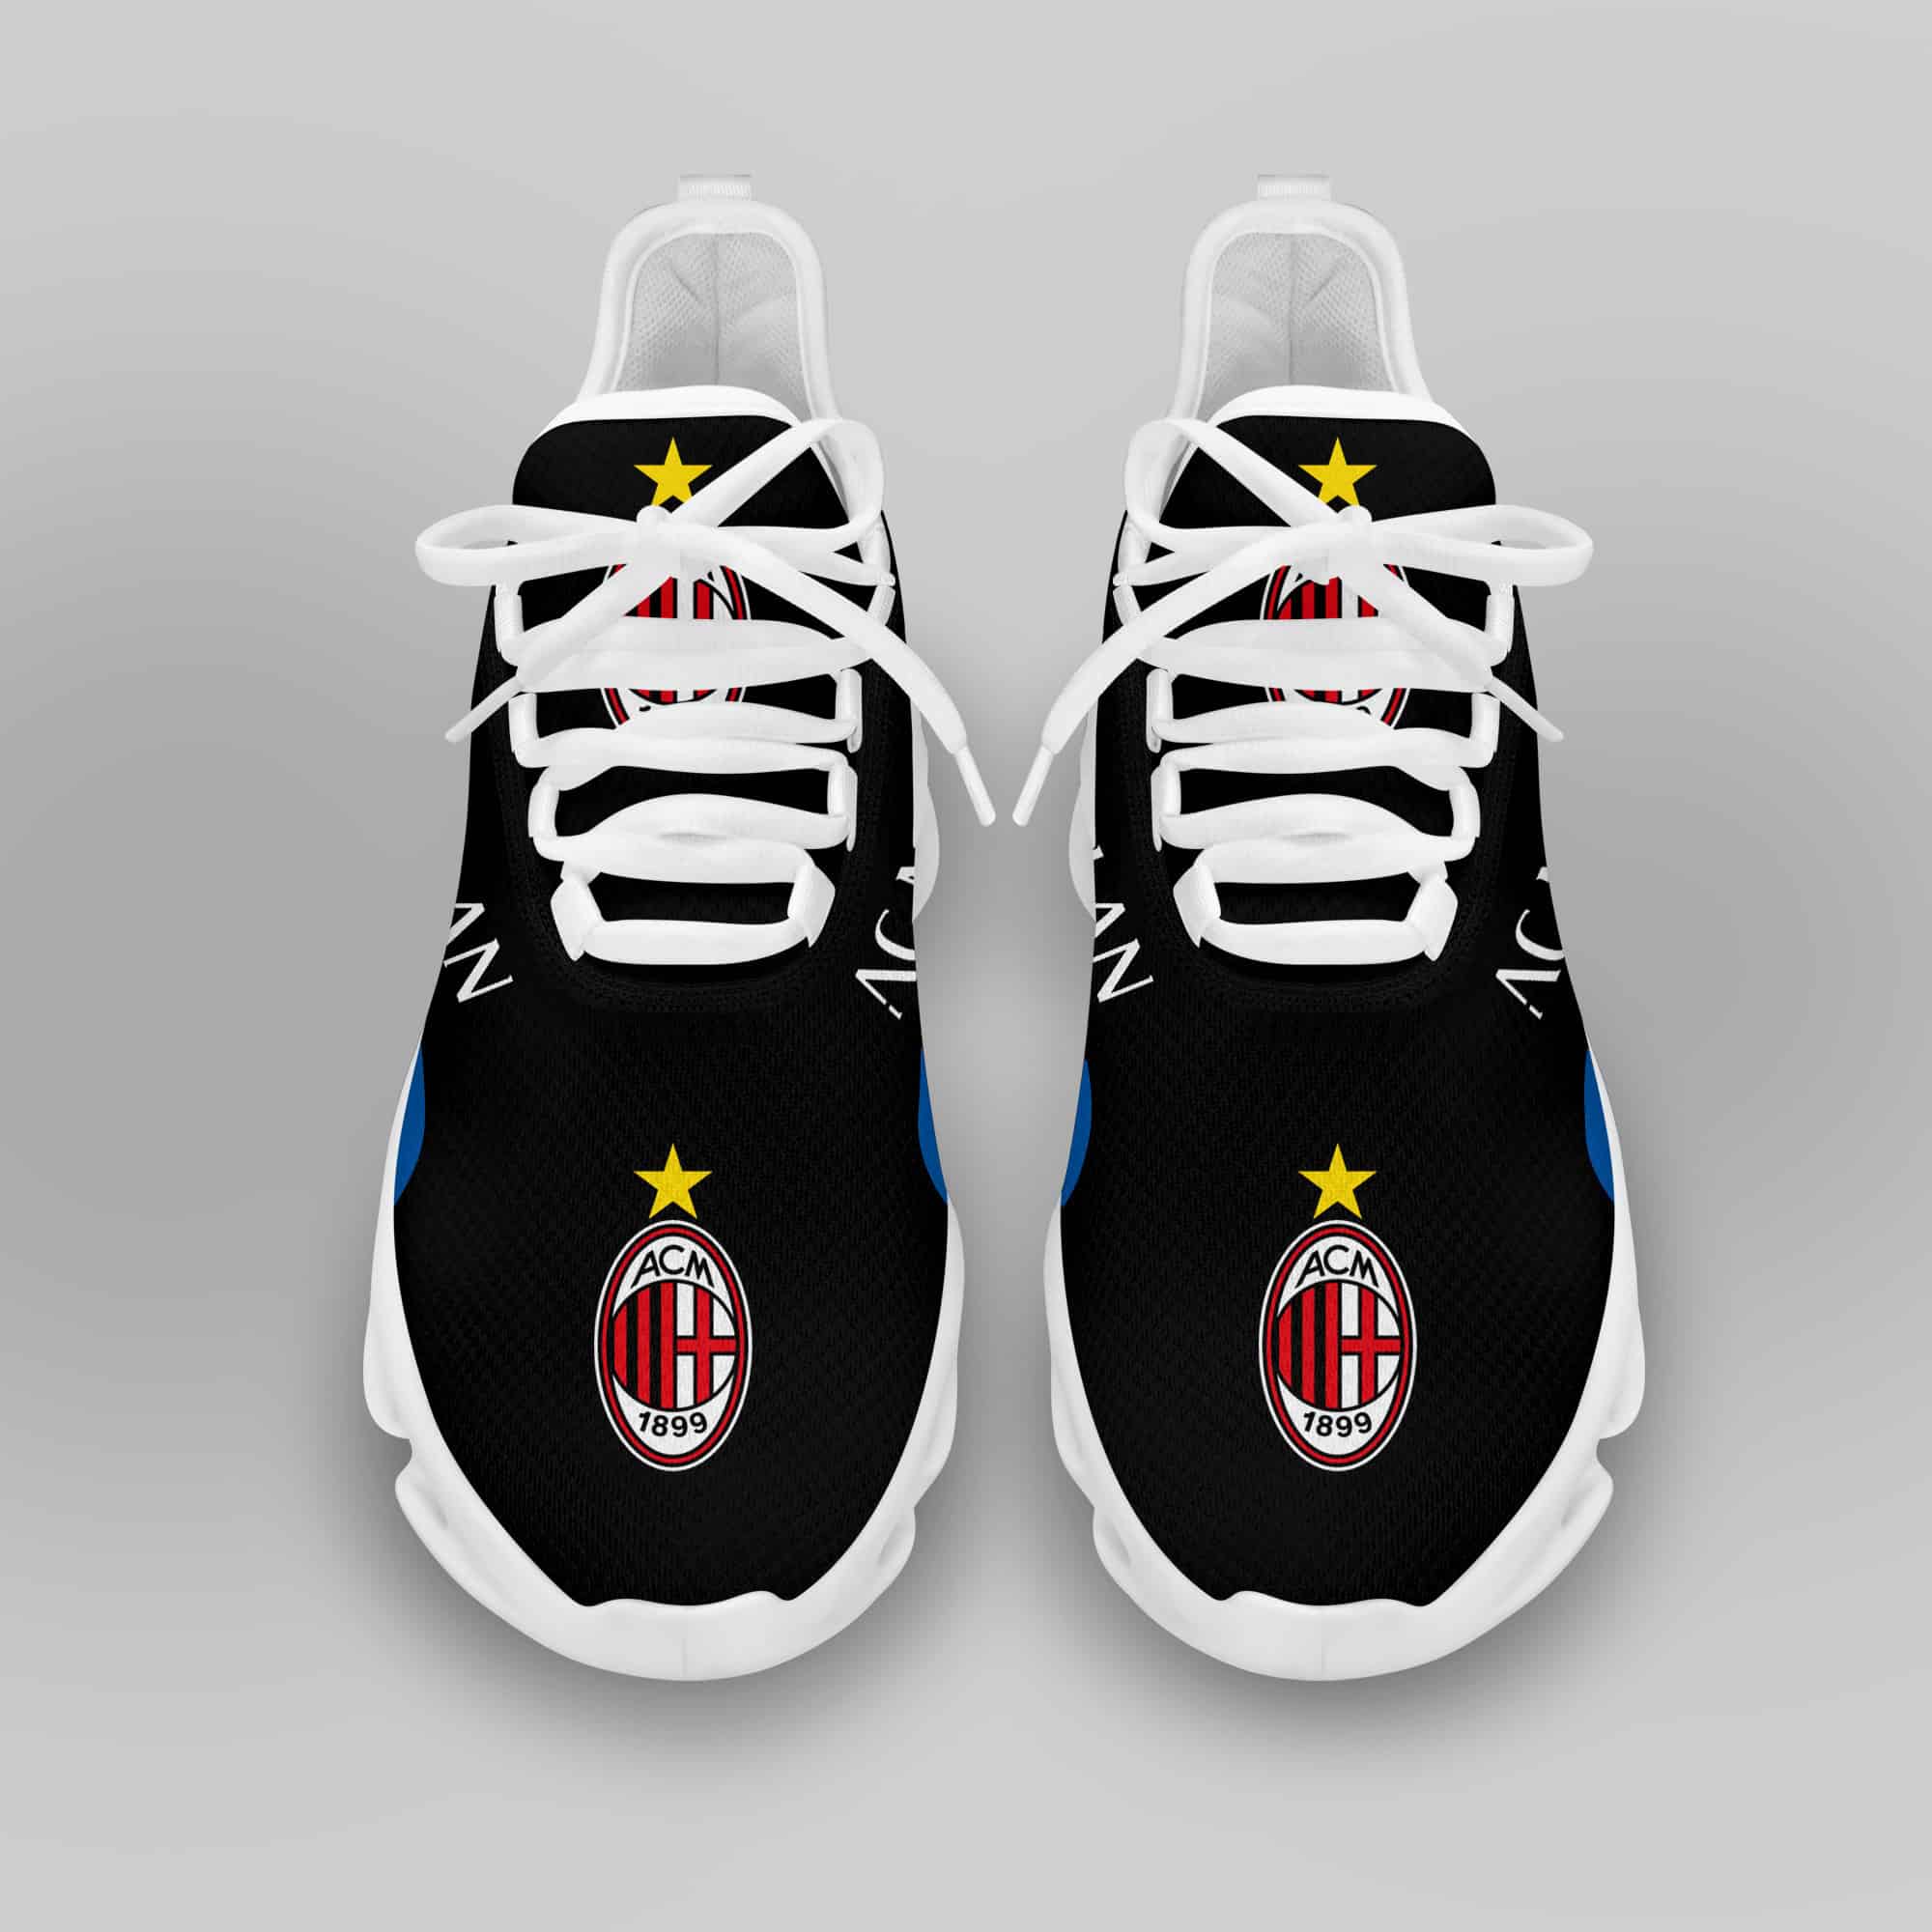 Ac Milan Running Shoes Max Soul Shoes Sneakers Ver 8 3